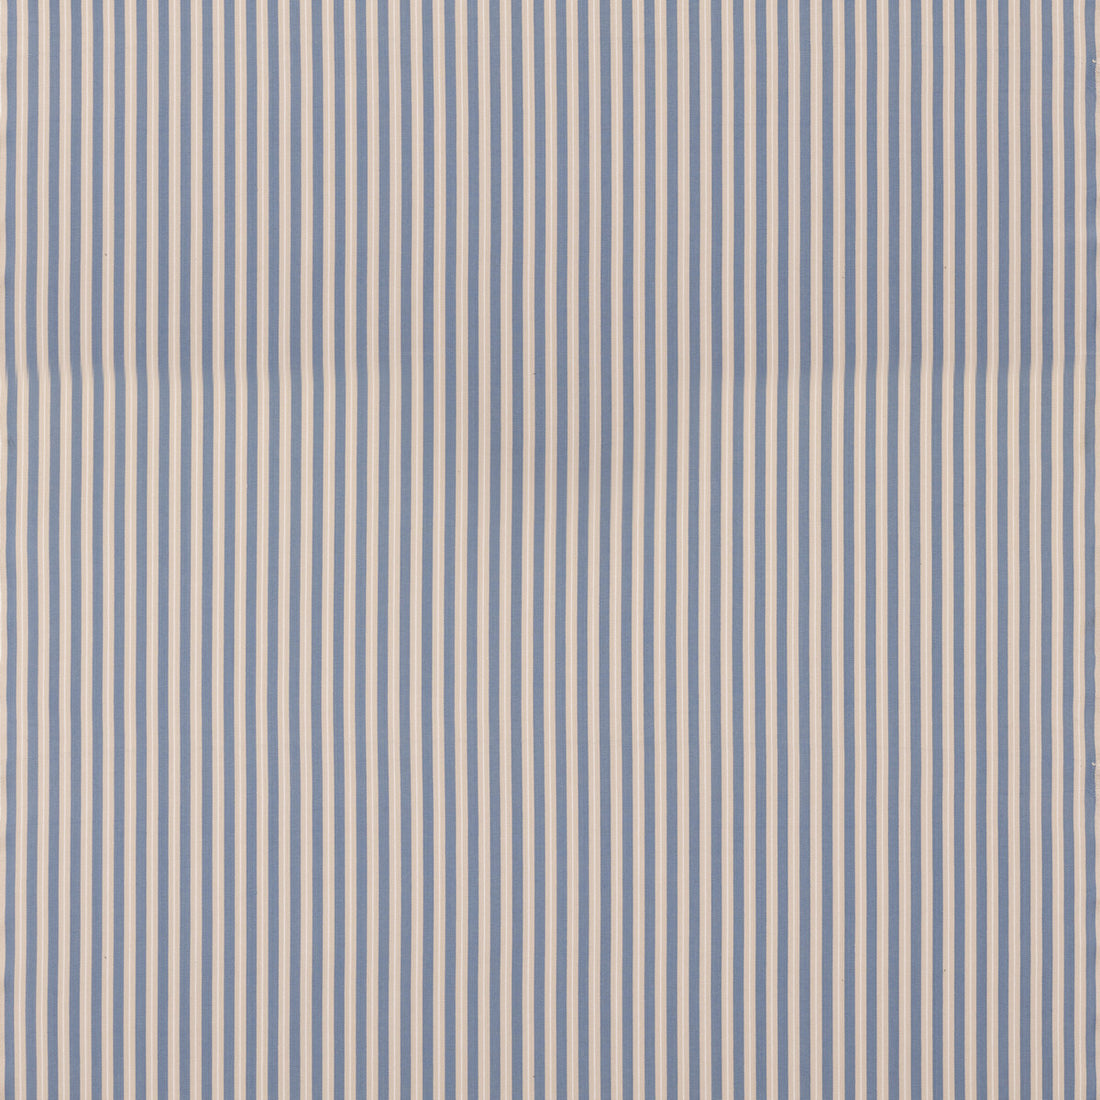 Compass Stripe fabric in blue color - pattern FD817.H101.0 - by Mulberry in the Westerly Stripes collection